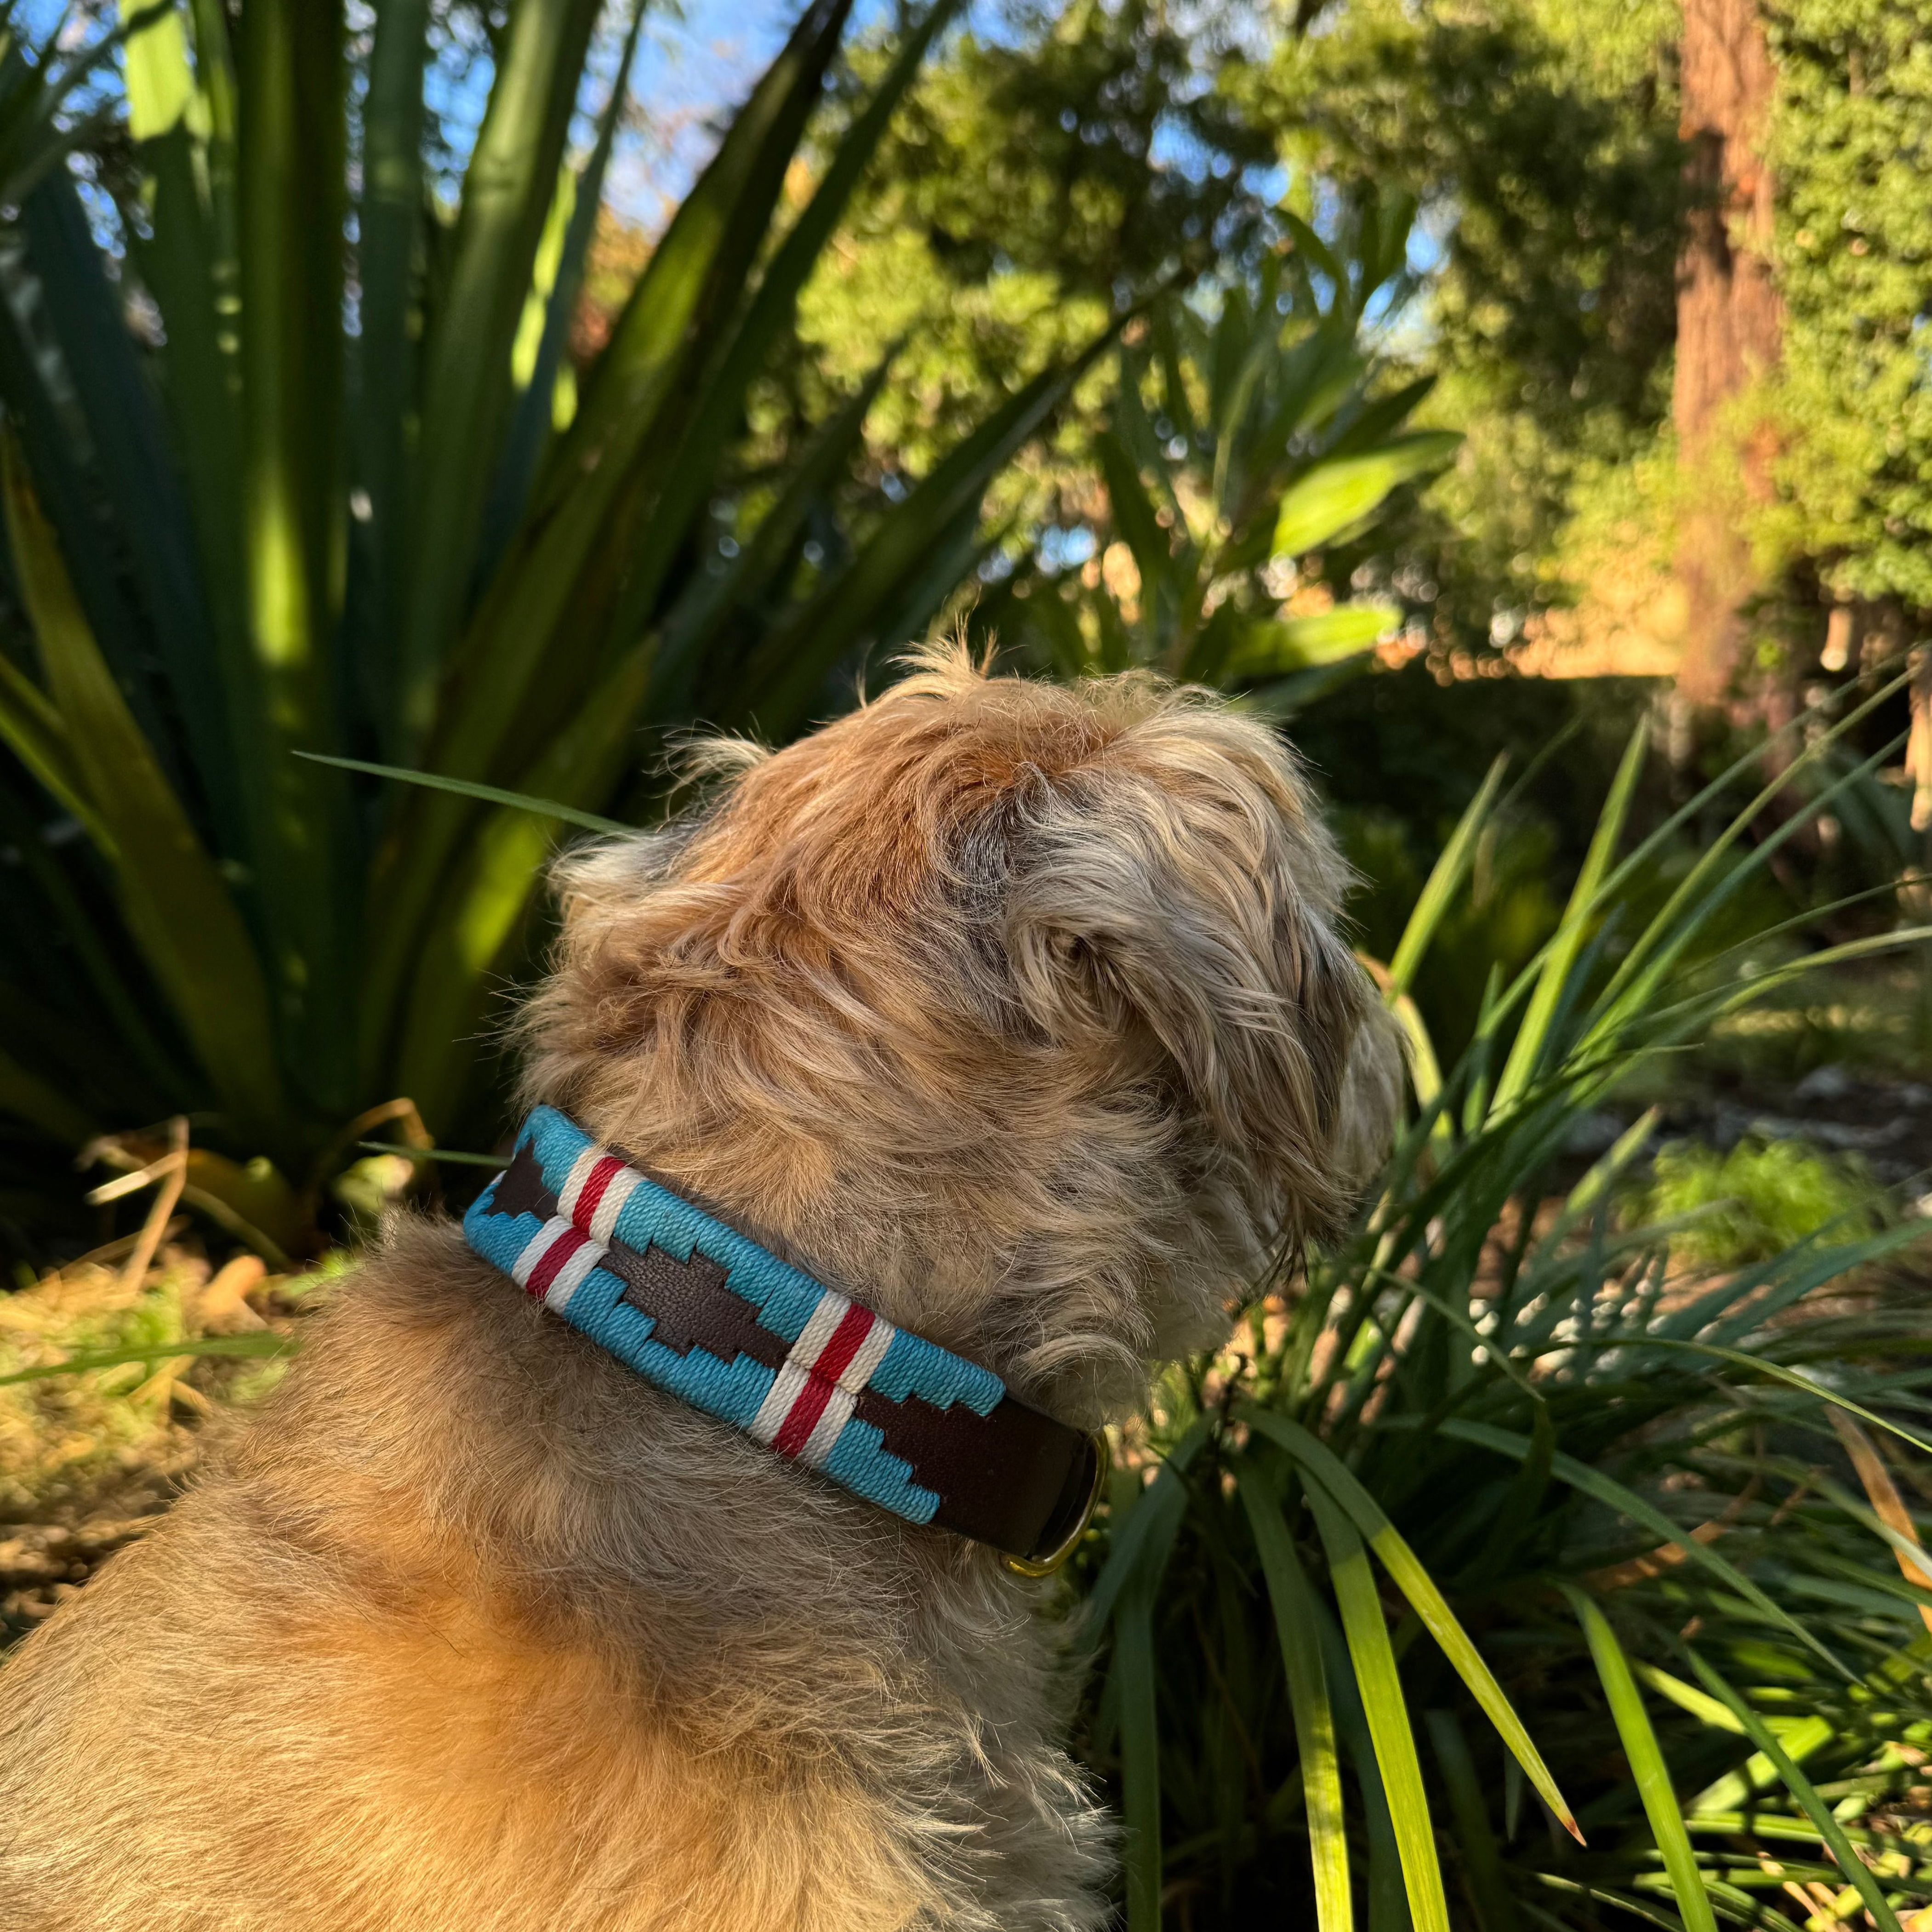 A fluffy, tan dog with a turquoise, red, and white Polo Collar - Jessie from Georgie Paws made of buffalo leather and antique brass hardware is sitting and facing away, looking at a garden with large green plants. Sunlight filters through the trees and plants, casting a warm glow on the dog's fur and the surrounding foliage.